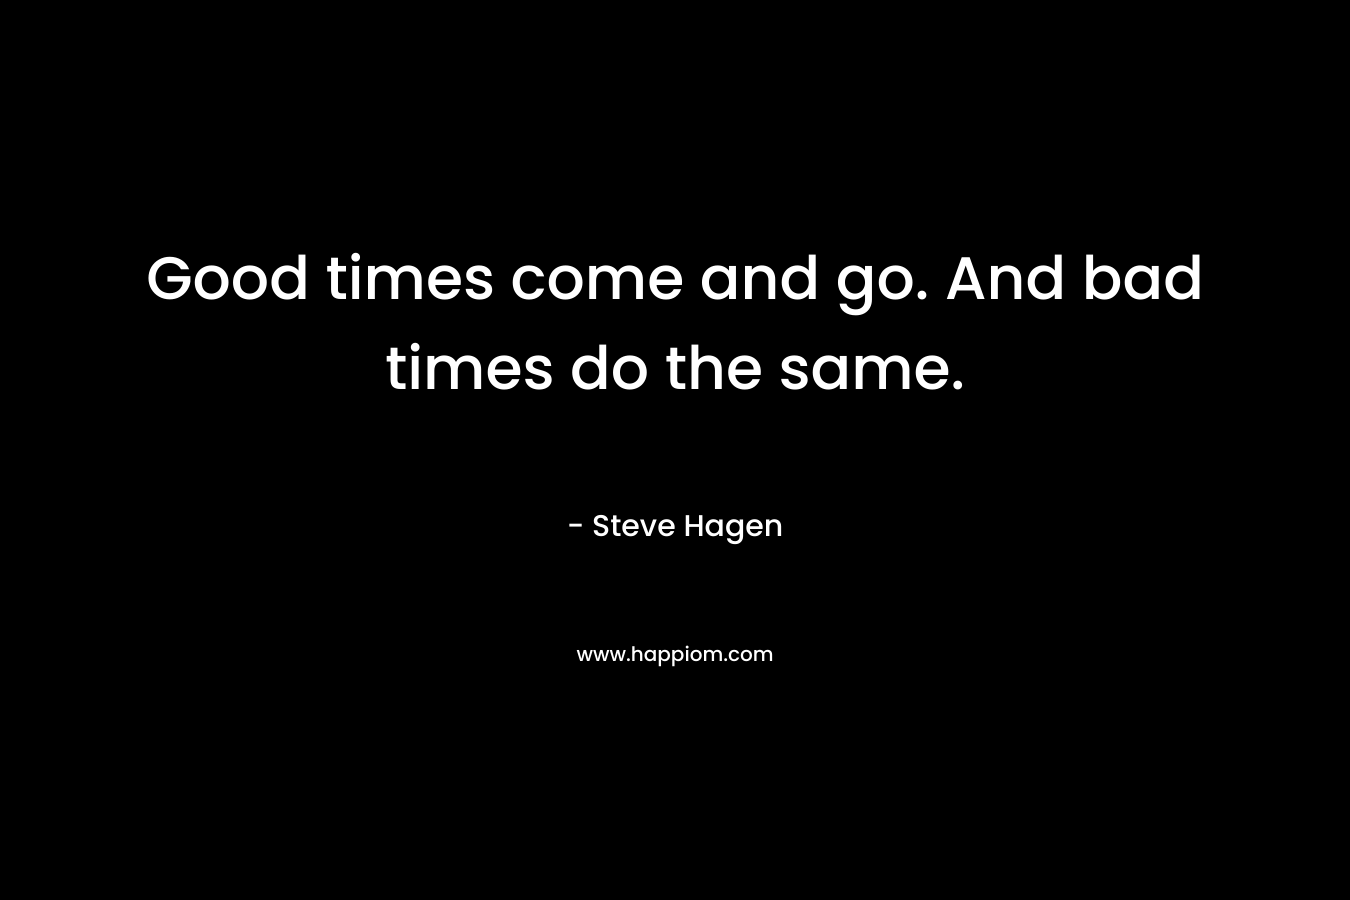 Good times come and go. And bad times do the same. – Steve Hagen